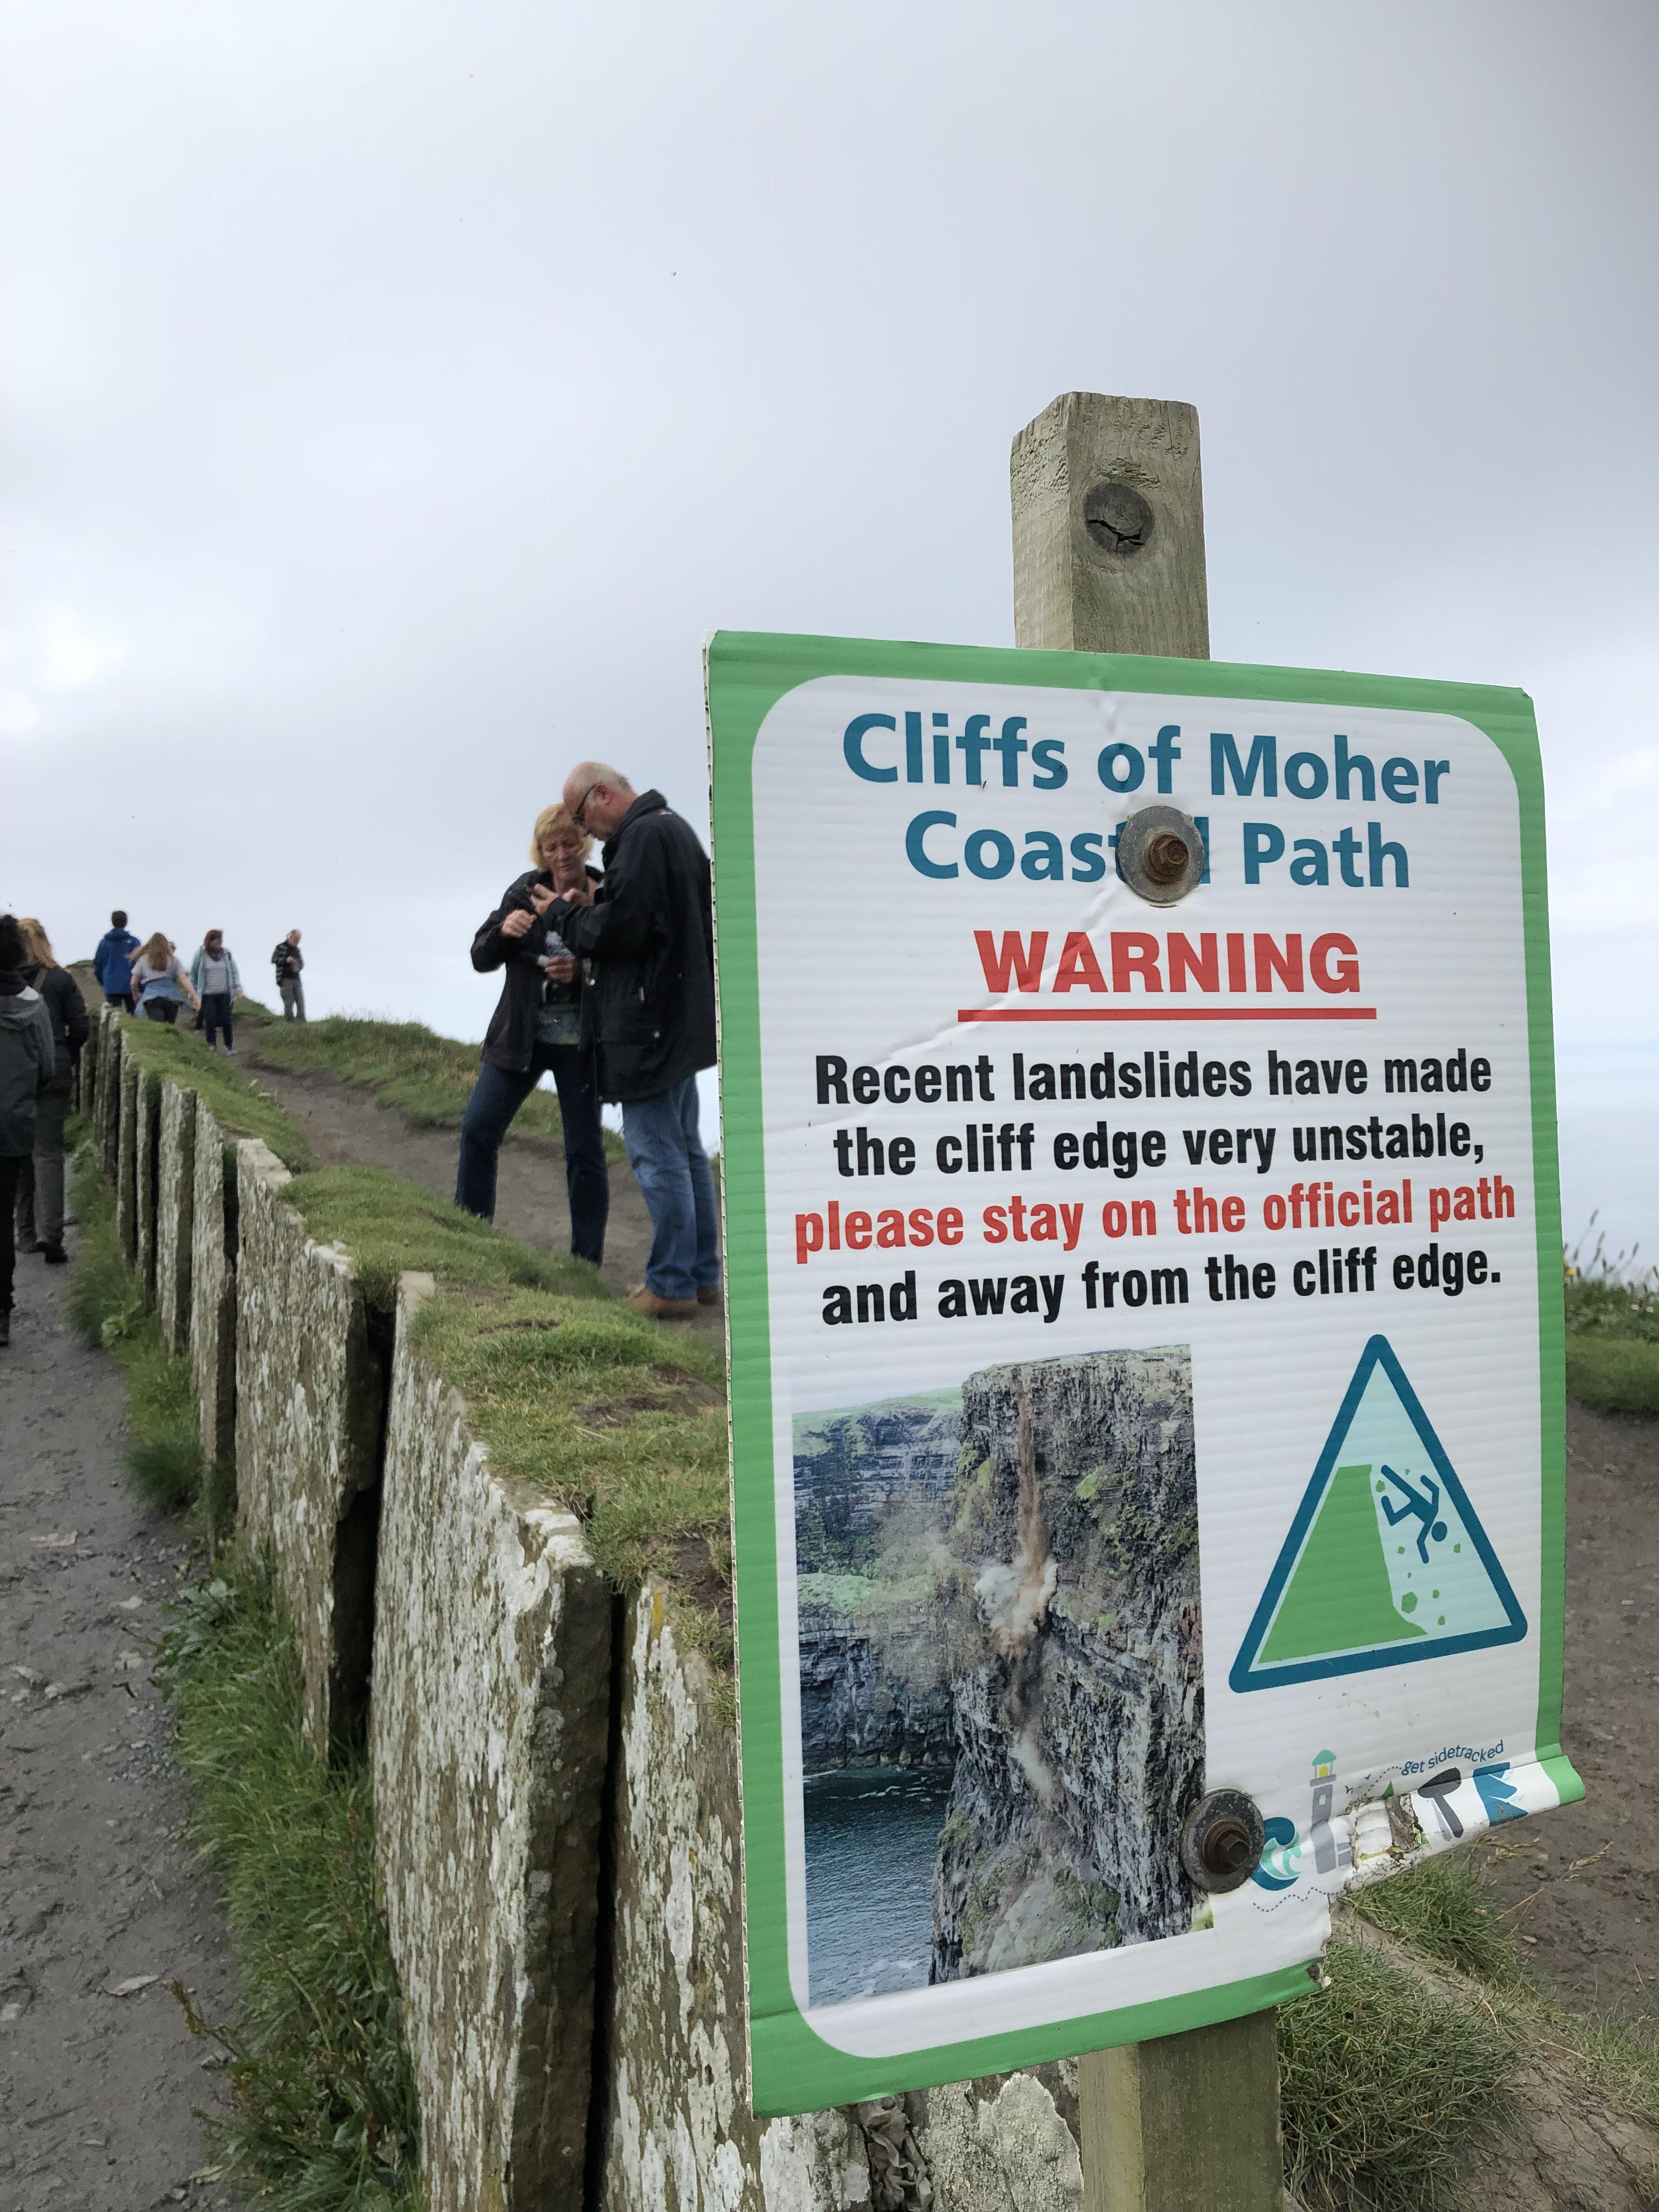 nature reserve - Cliffs of Moher Coast Path Warning Recent landslides have made the cliff edge very unstable, please stay on the official path and away from the cliff edge.